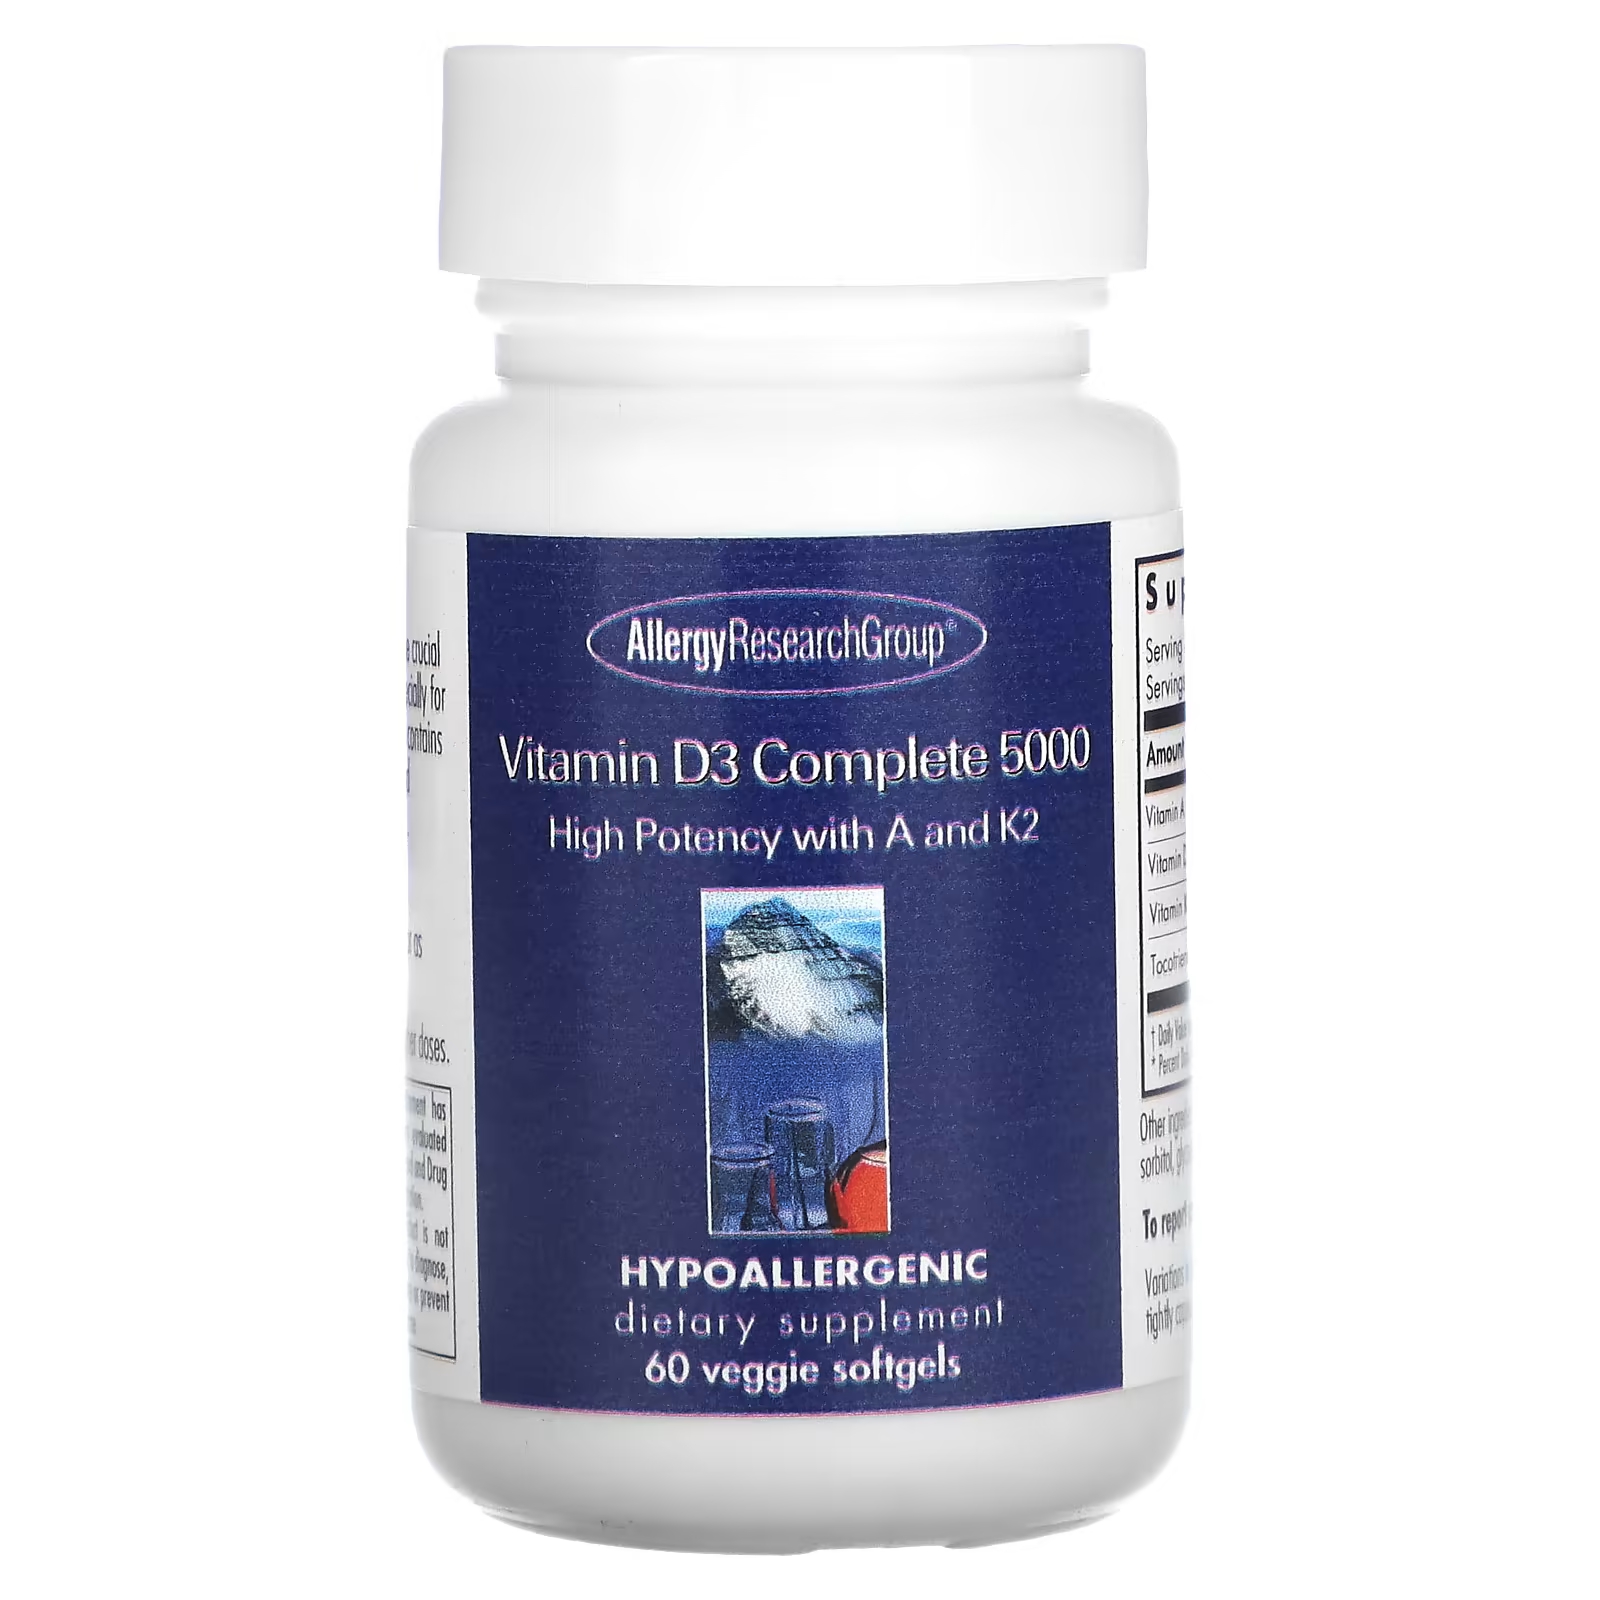 allergy research group vitamin d3 complete 5000 iu 60 softgels Пищевая добавка Allergy Research Group Vitamin D3 Complete 5000, 60 мягких таблеток